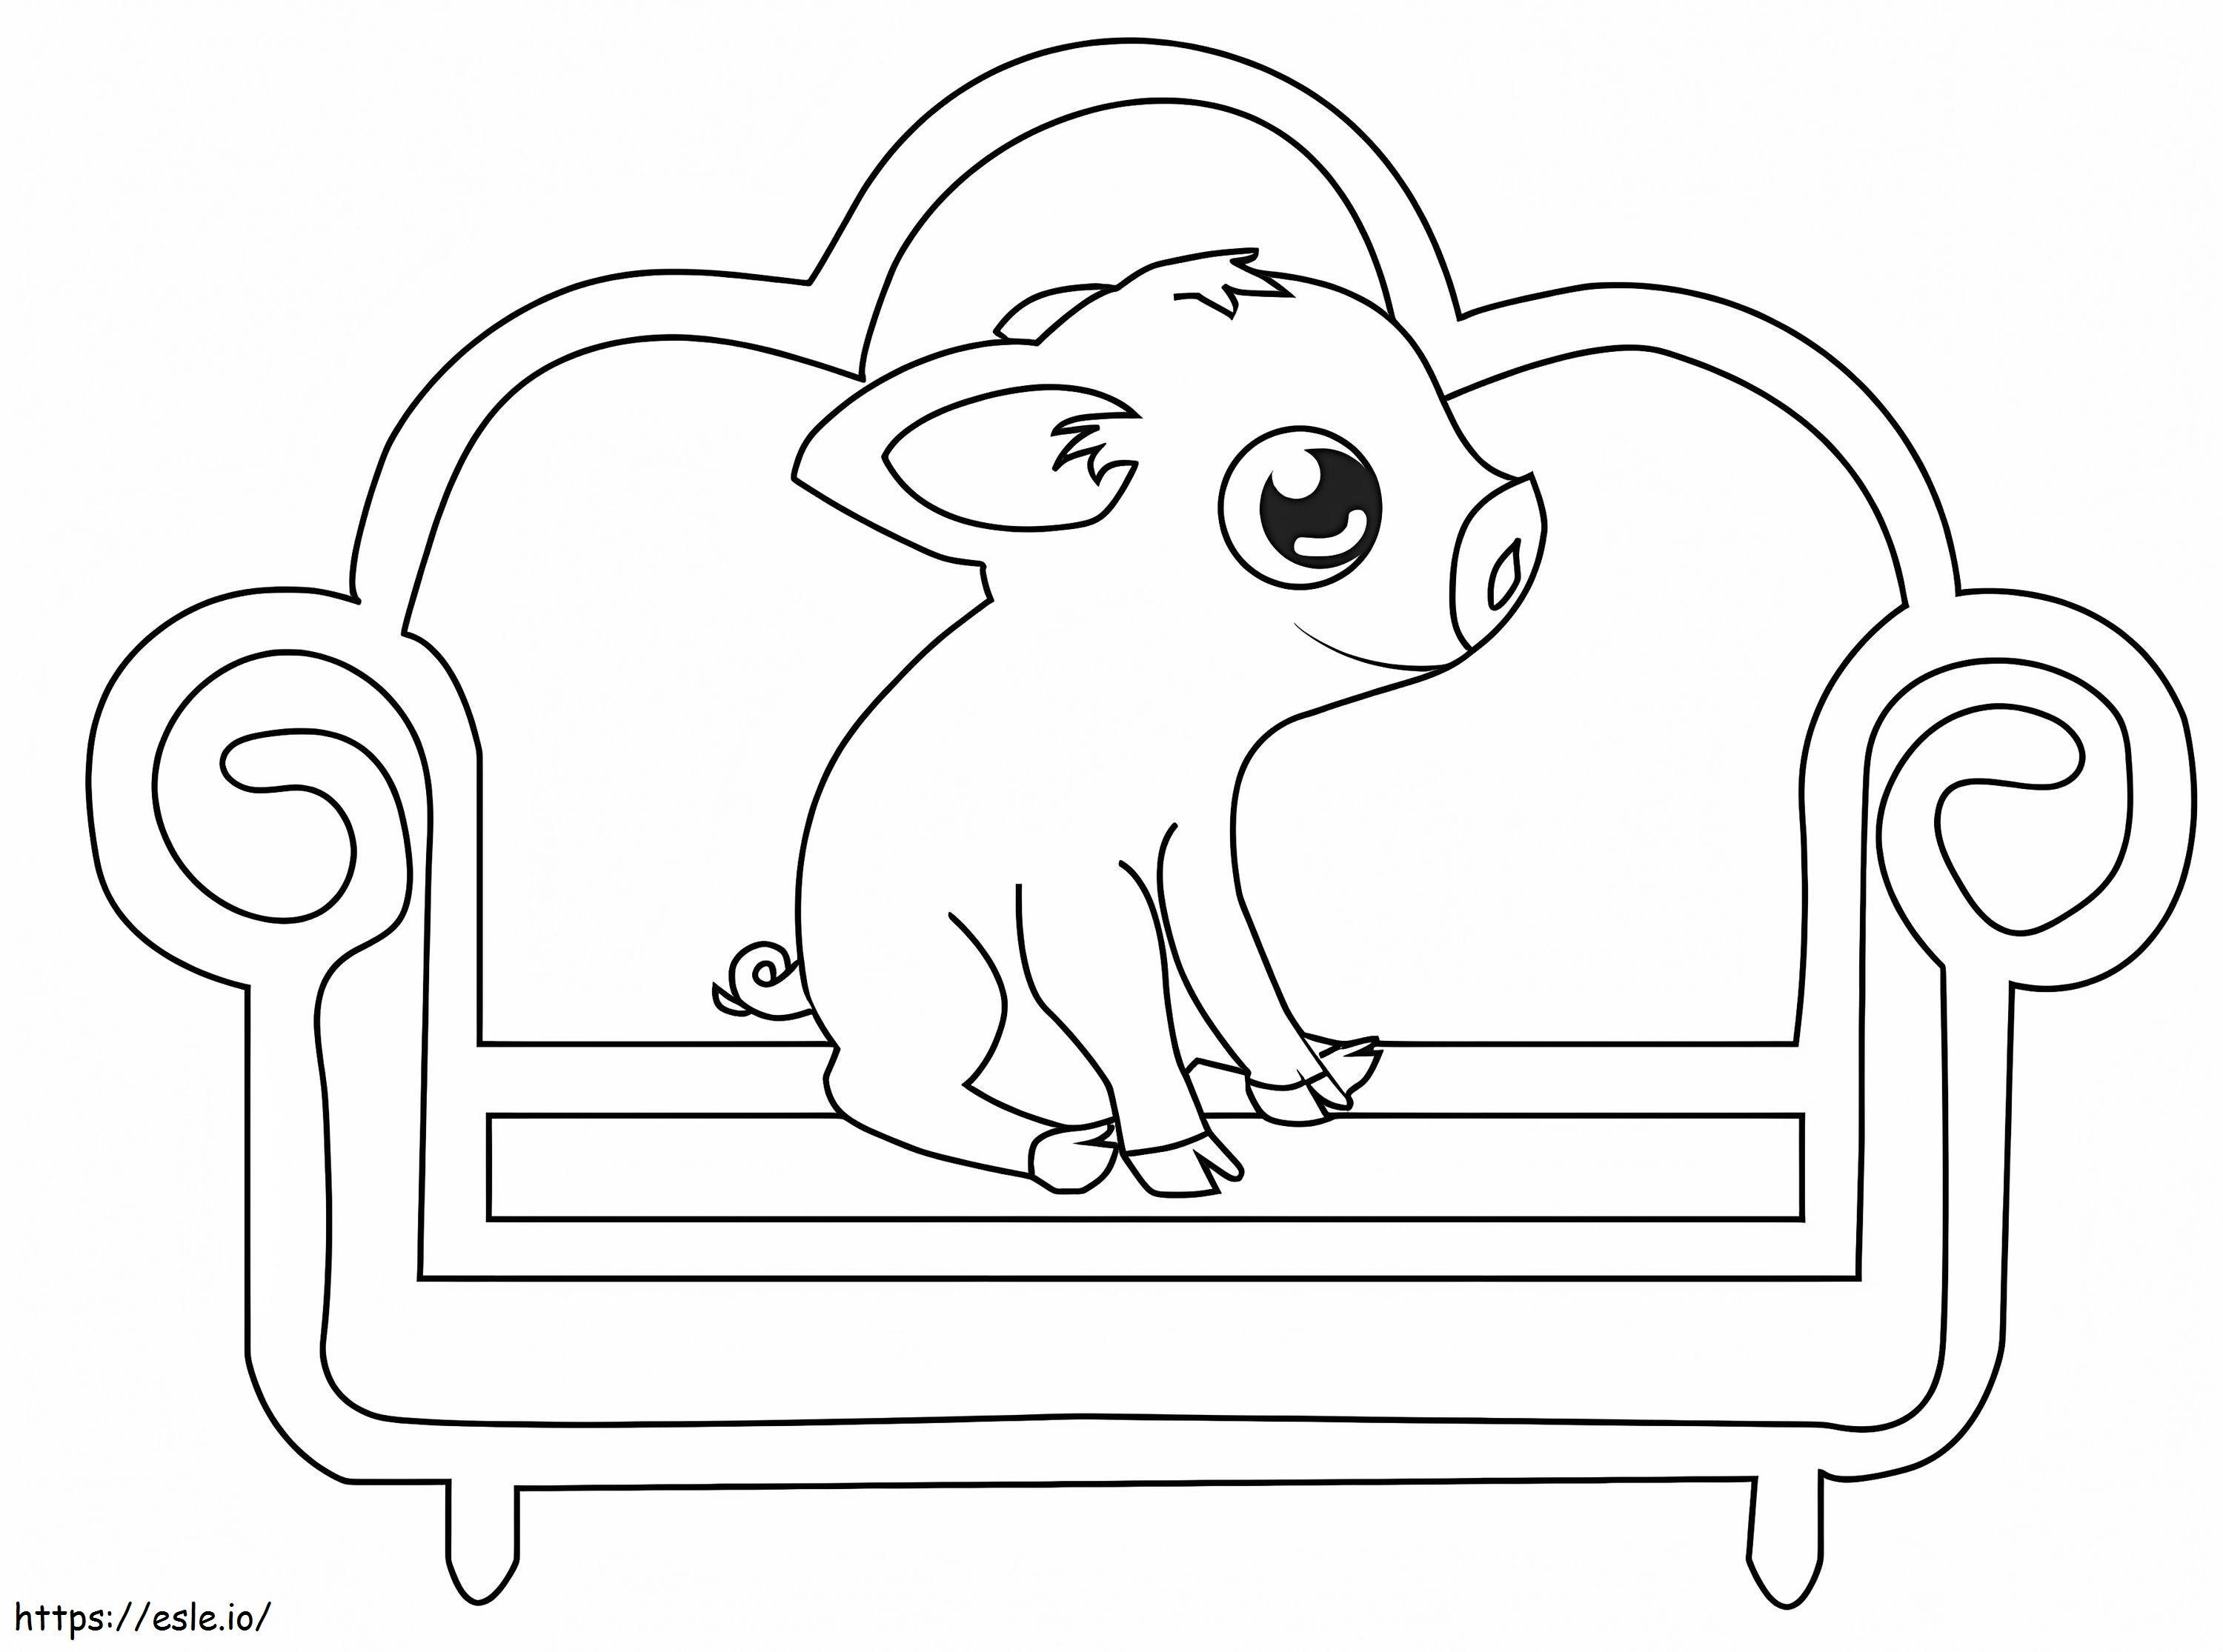 Baby Pig On A Couch coloring page